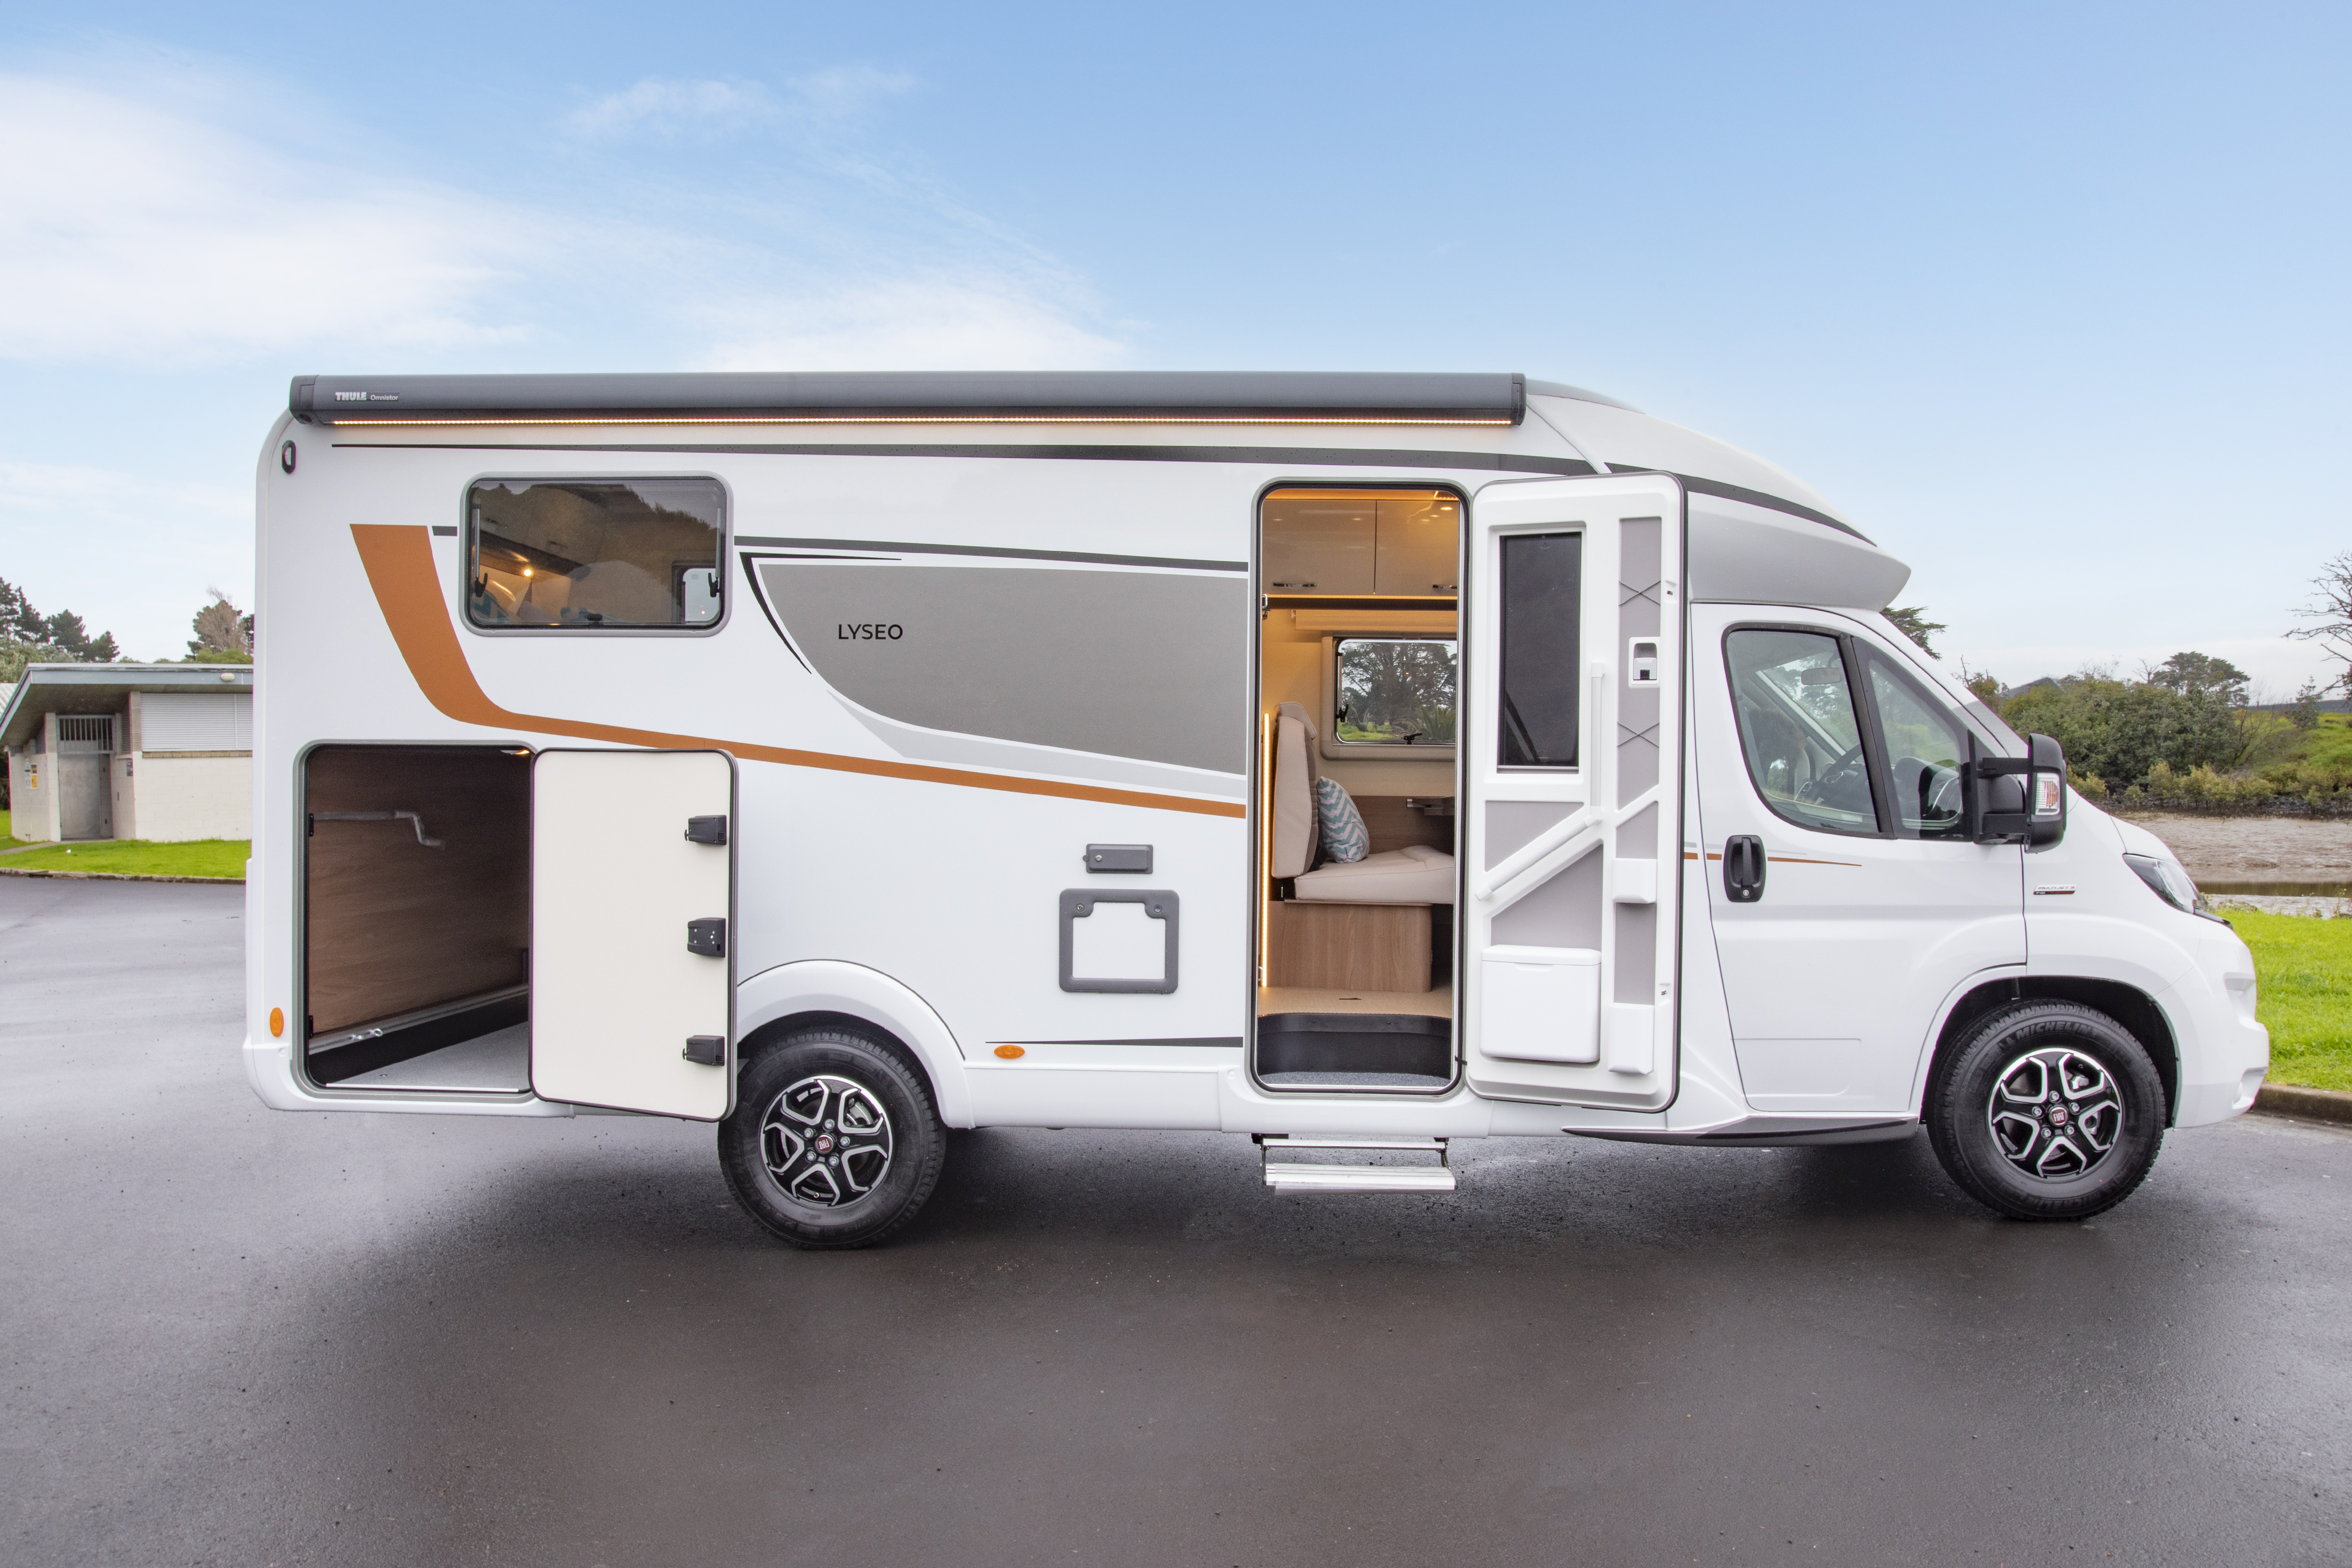 Wilderness 2023 Lyseo TD690G motorhome exterior side and storage